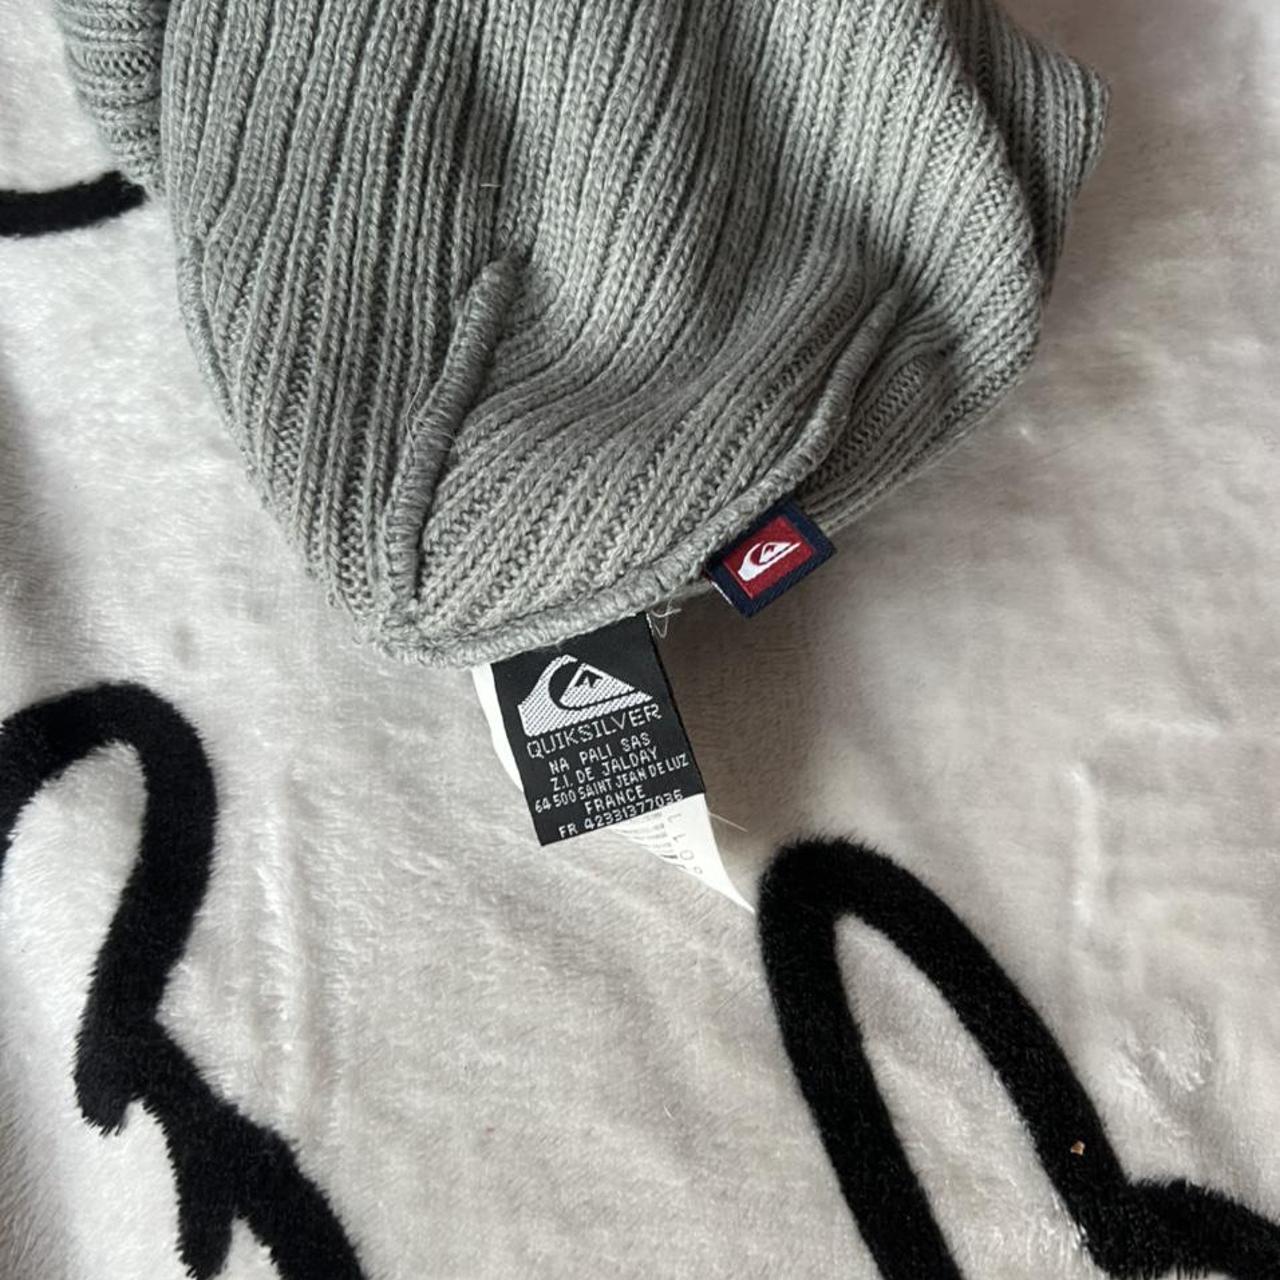 Product Image 3 - Quicksilver very warm winter beanie
Free